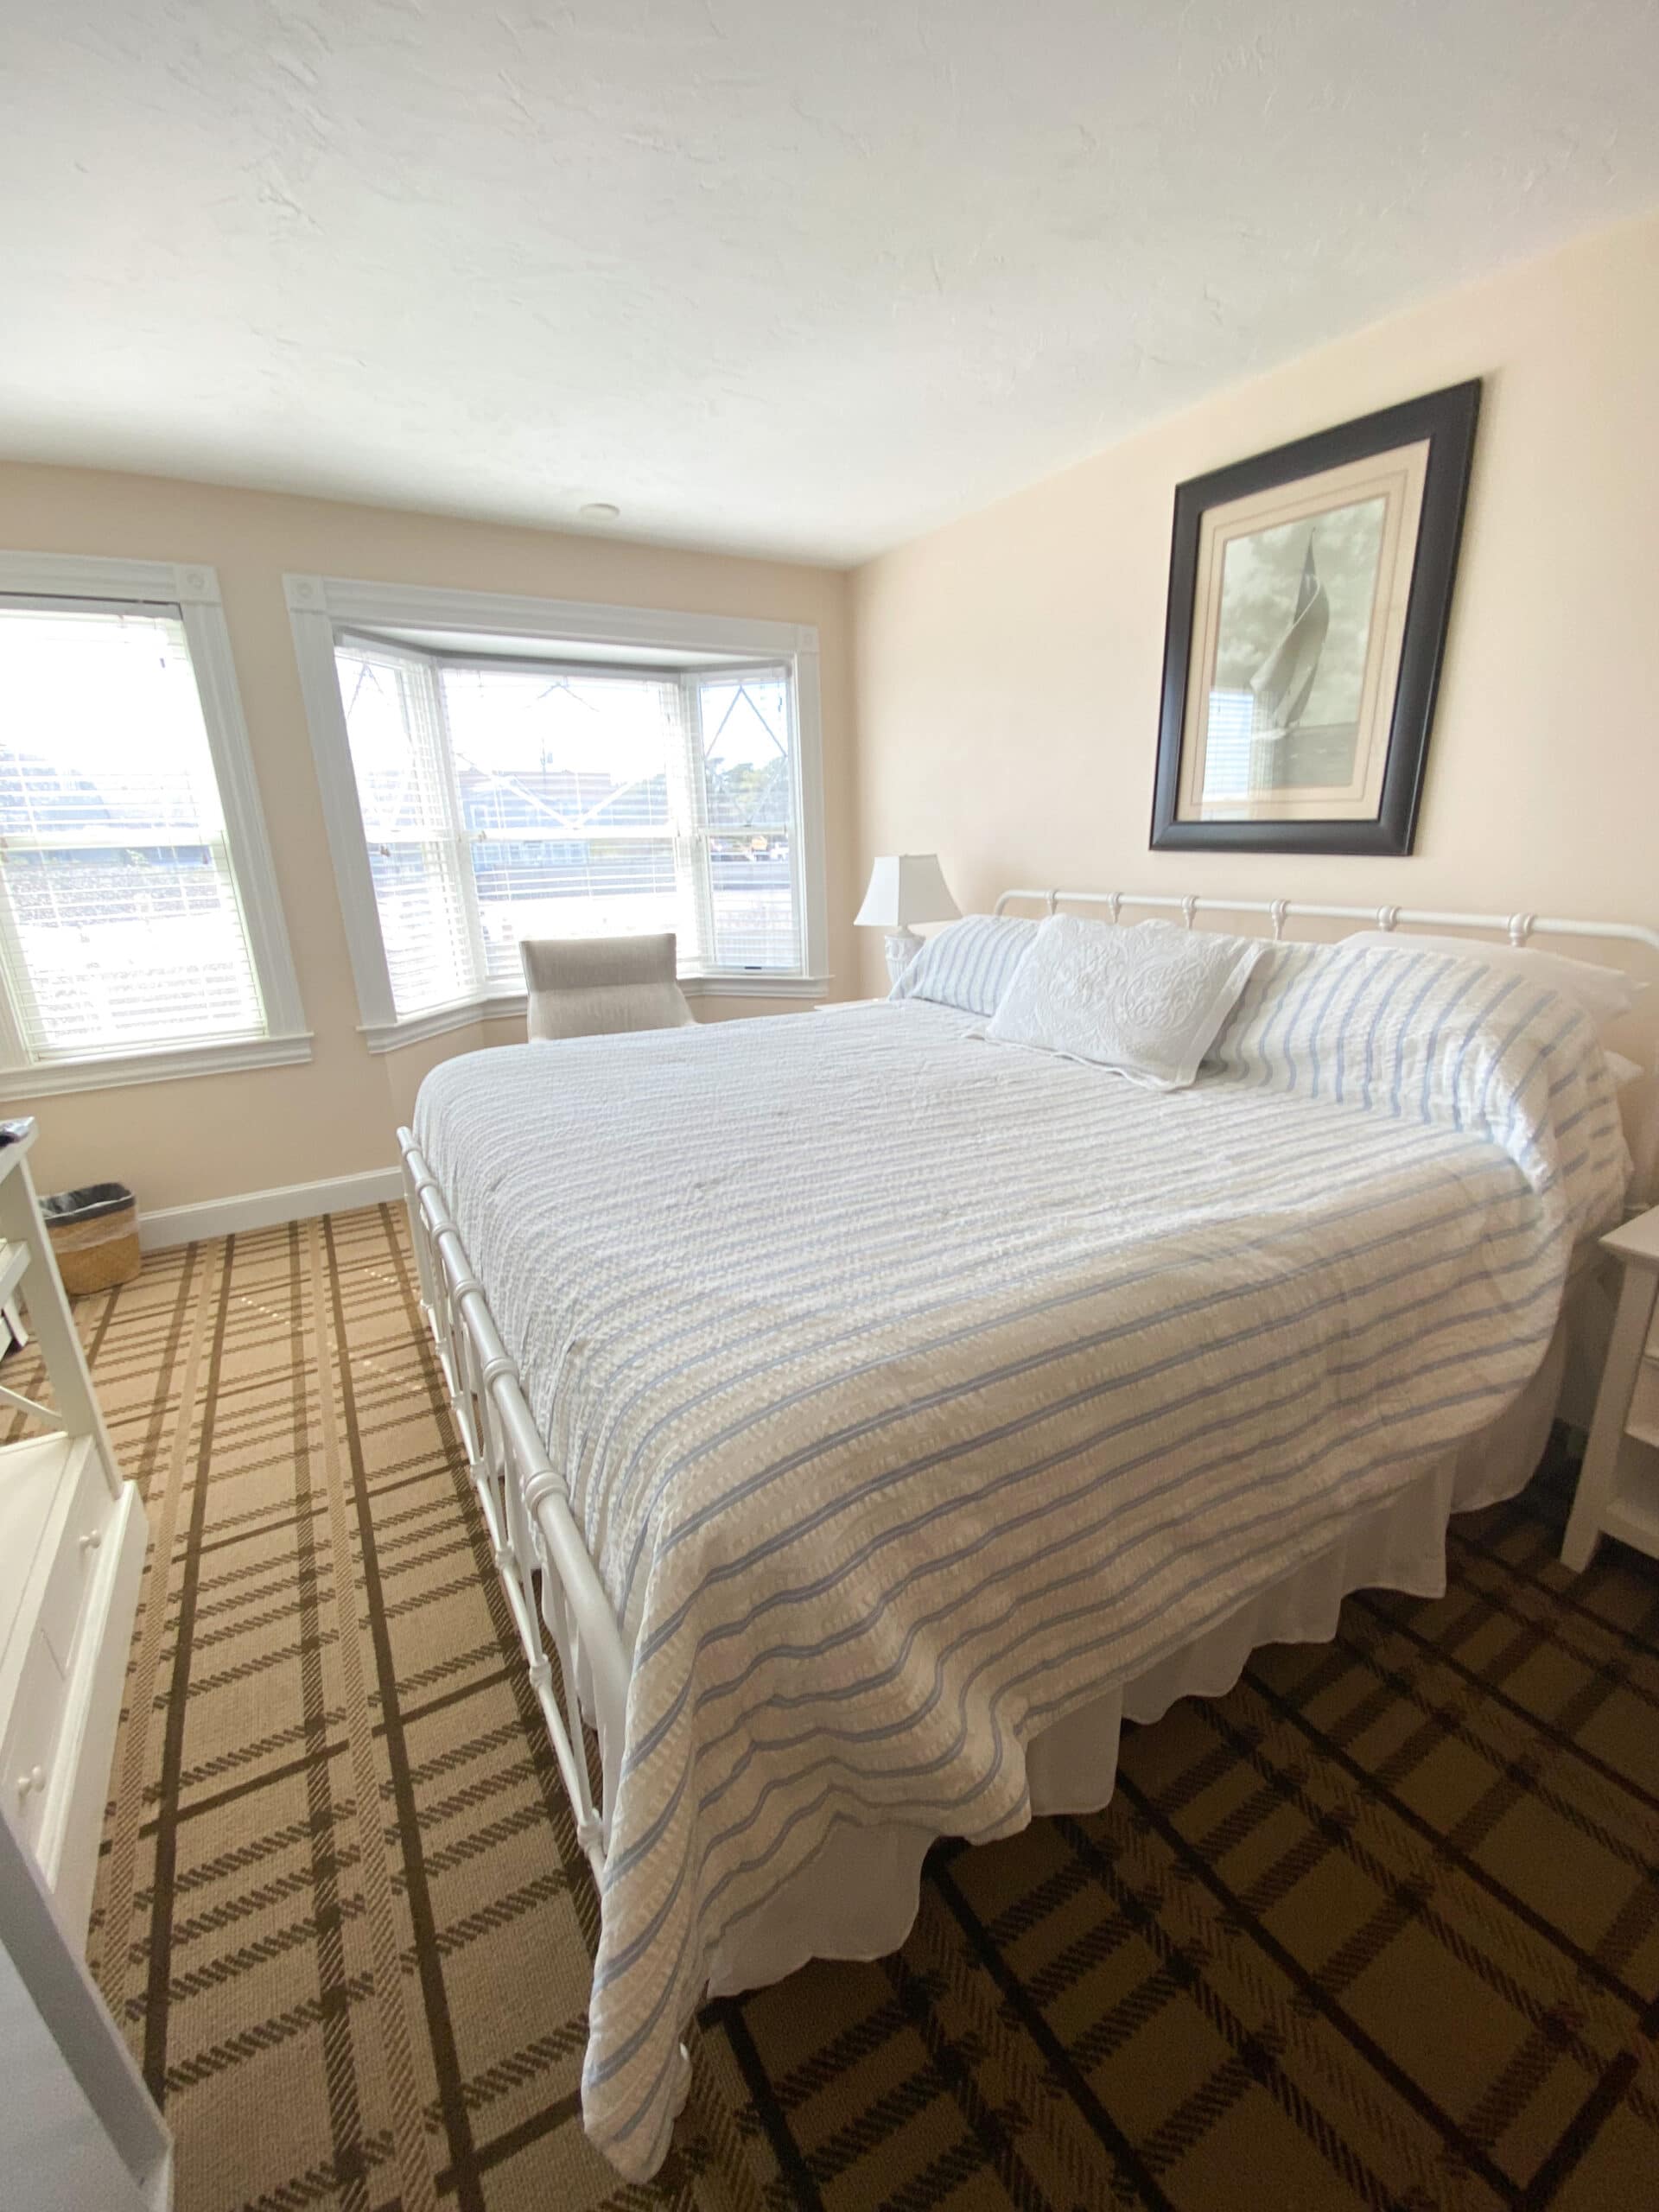 Spacious with Views, Room #112